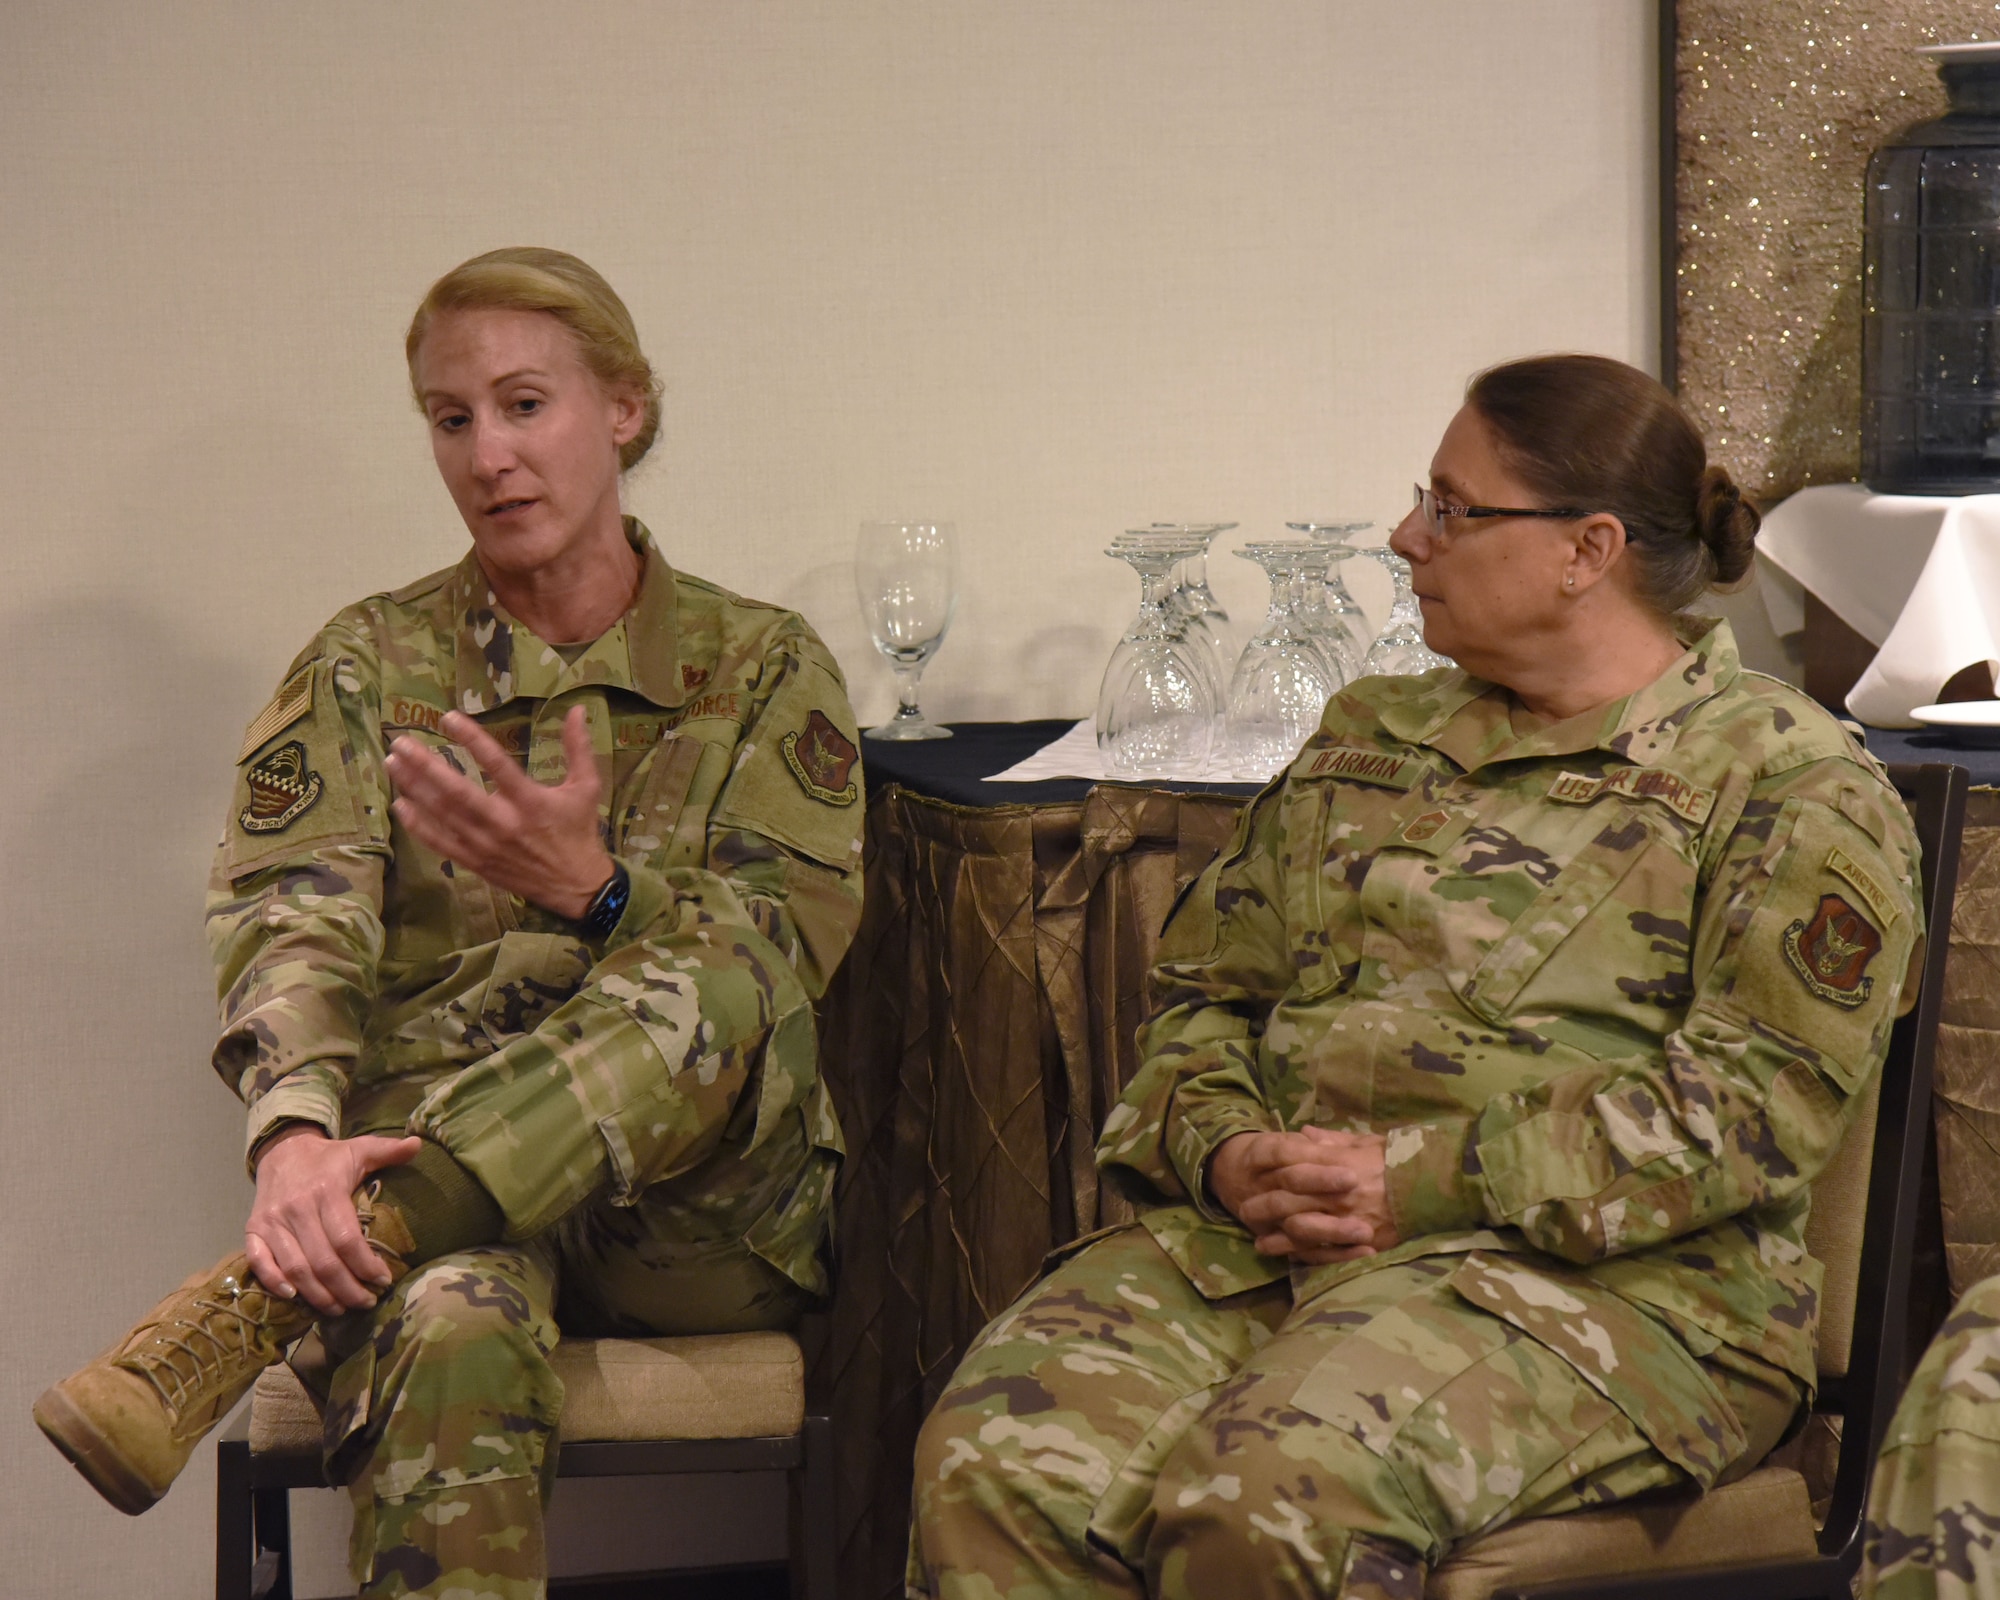 Chief Master Sgt. Mary E. Dearman, right, 477th Fighter Group senior enlisted leader, listens as Chief Master Sgt. Karie A. Contreras, 482nd Fighter Wing senior enlisted leader, discusses unit reform during the Annual Commanders and Command Chiefs management and leadership review event held in Fort Worth, Texas, June 20-23. The three-day session focused on disseminating information from 10th Air Force senior leaders to commanders and chief master sergeants on various topics to include budgeting, recruitment challenges and force restructure. (U.S. Air Force photo by 2nd Lt. Mary A. Andom)